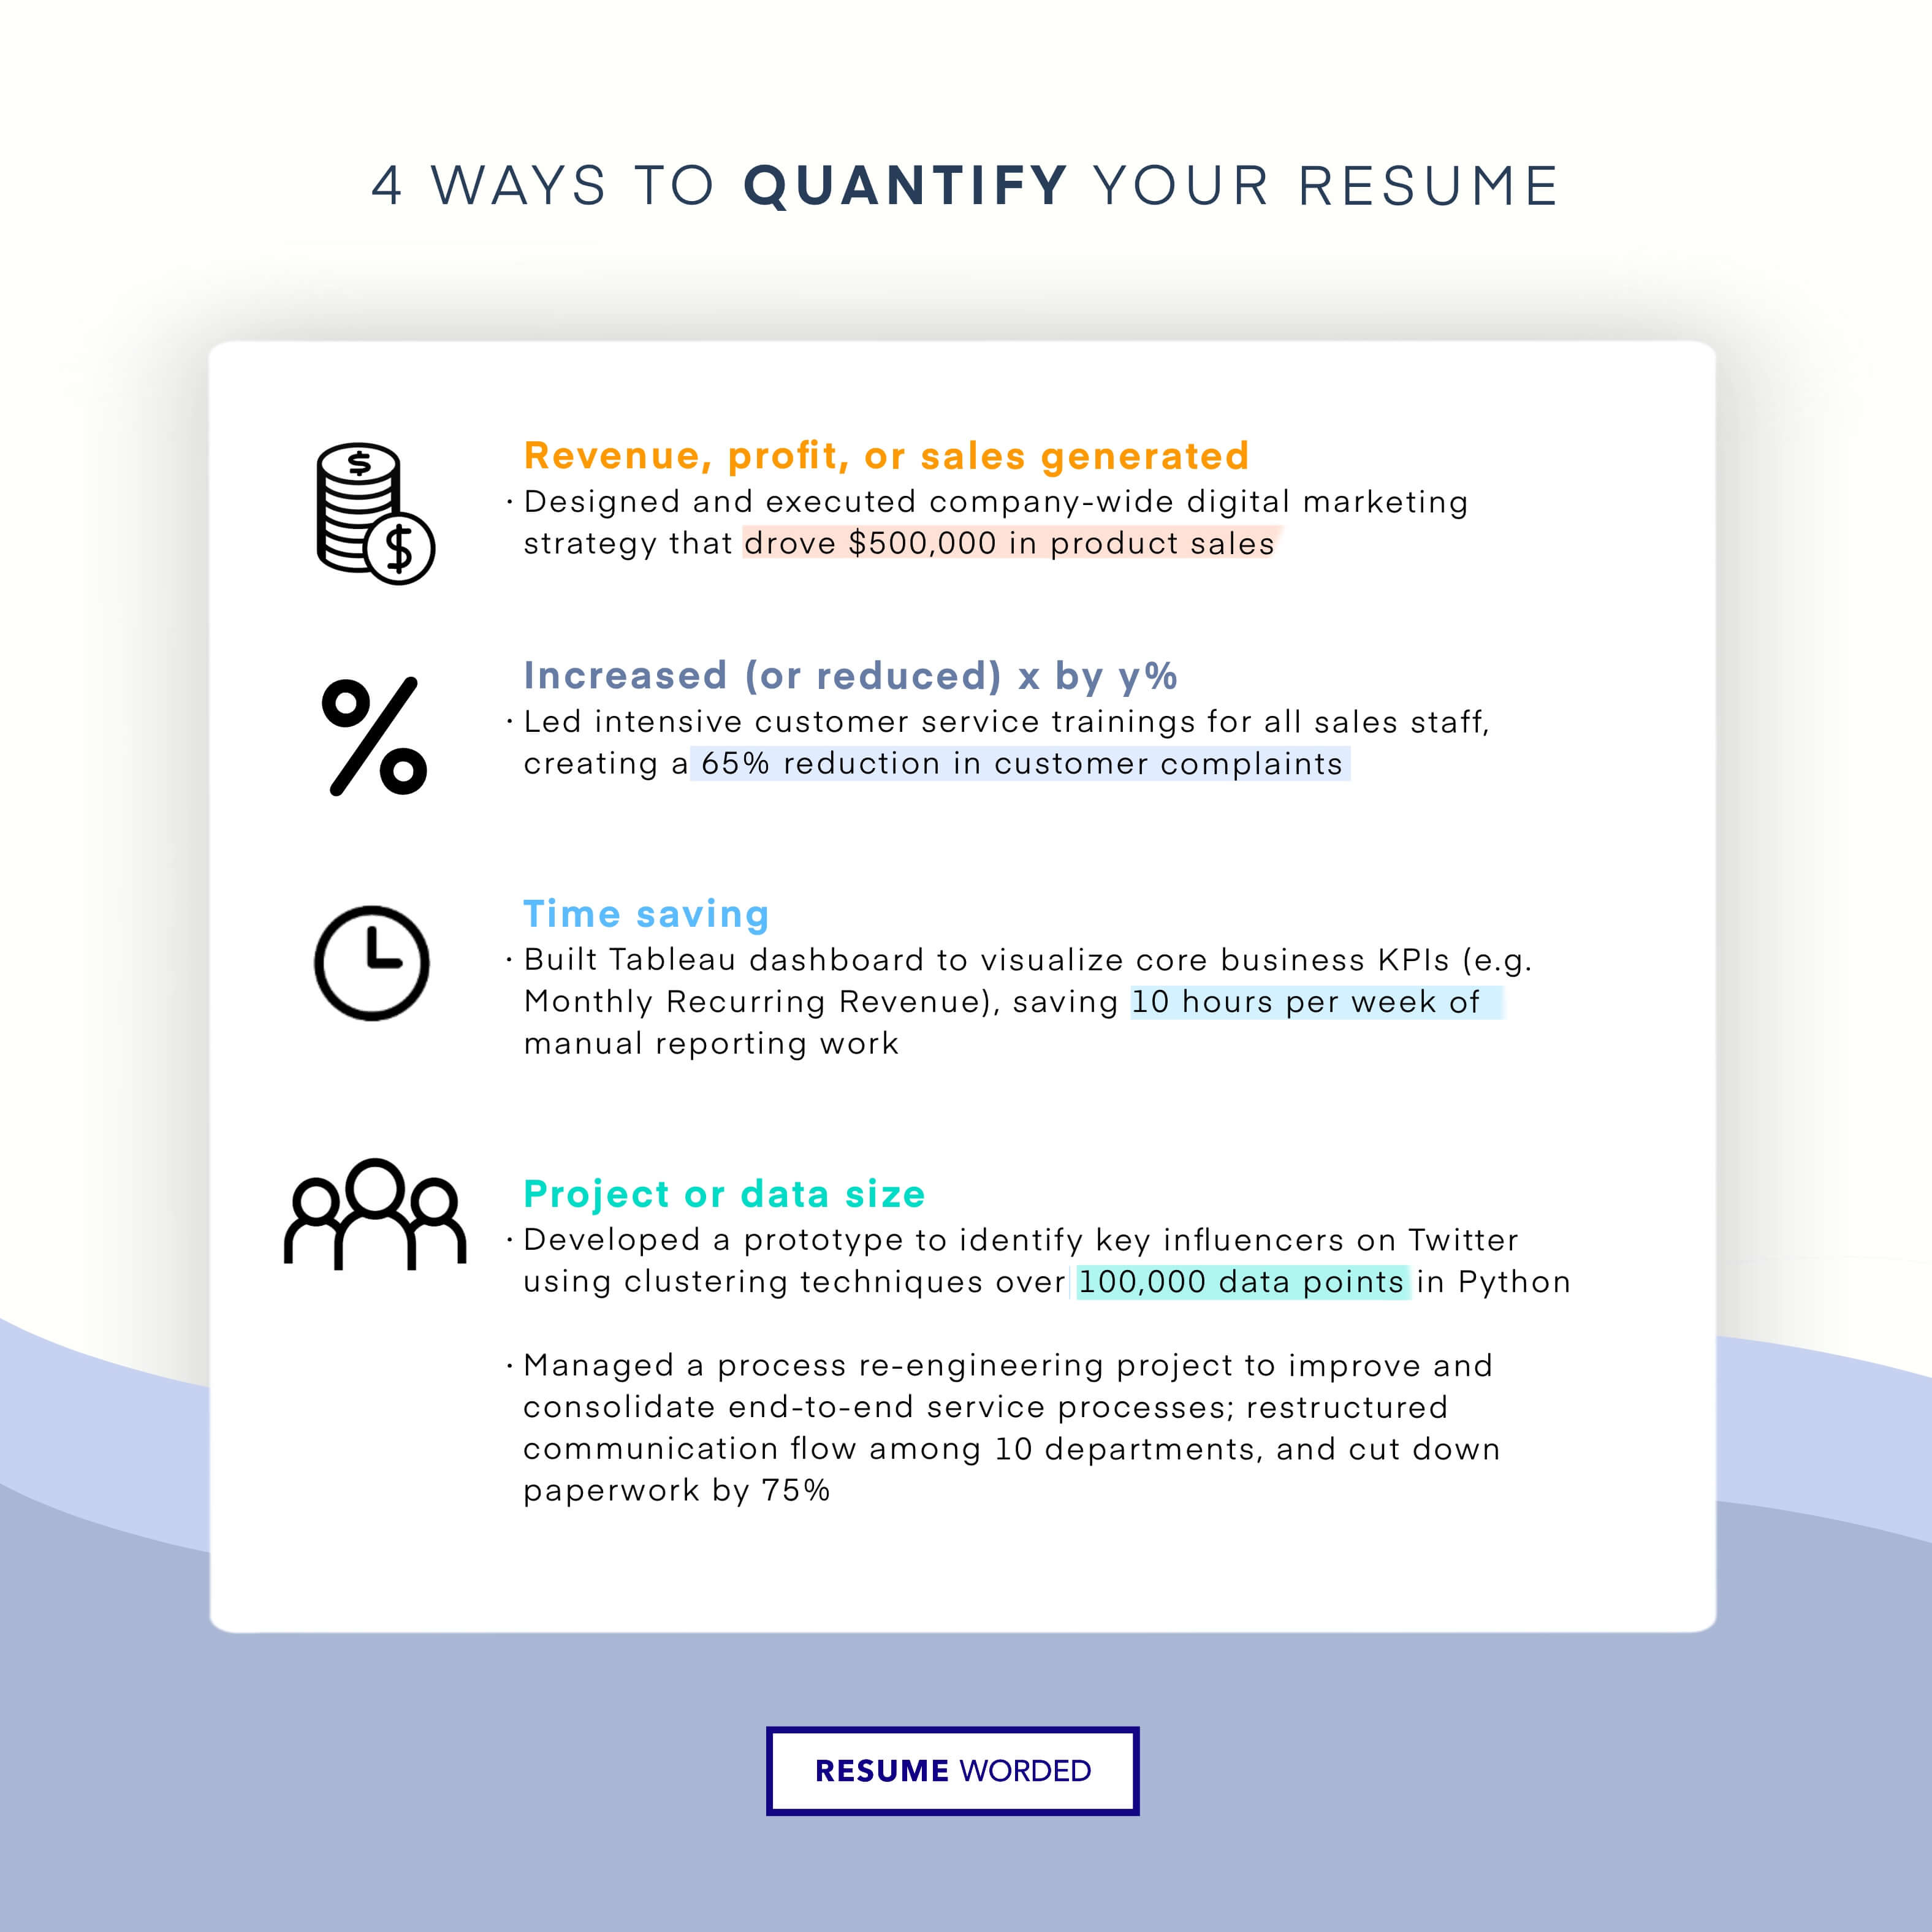 Quantify your value addition. - Equity Research Analyst Resume